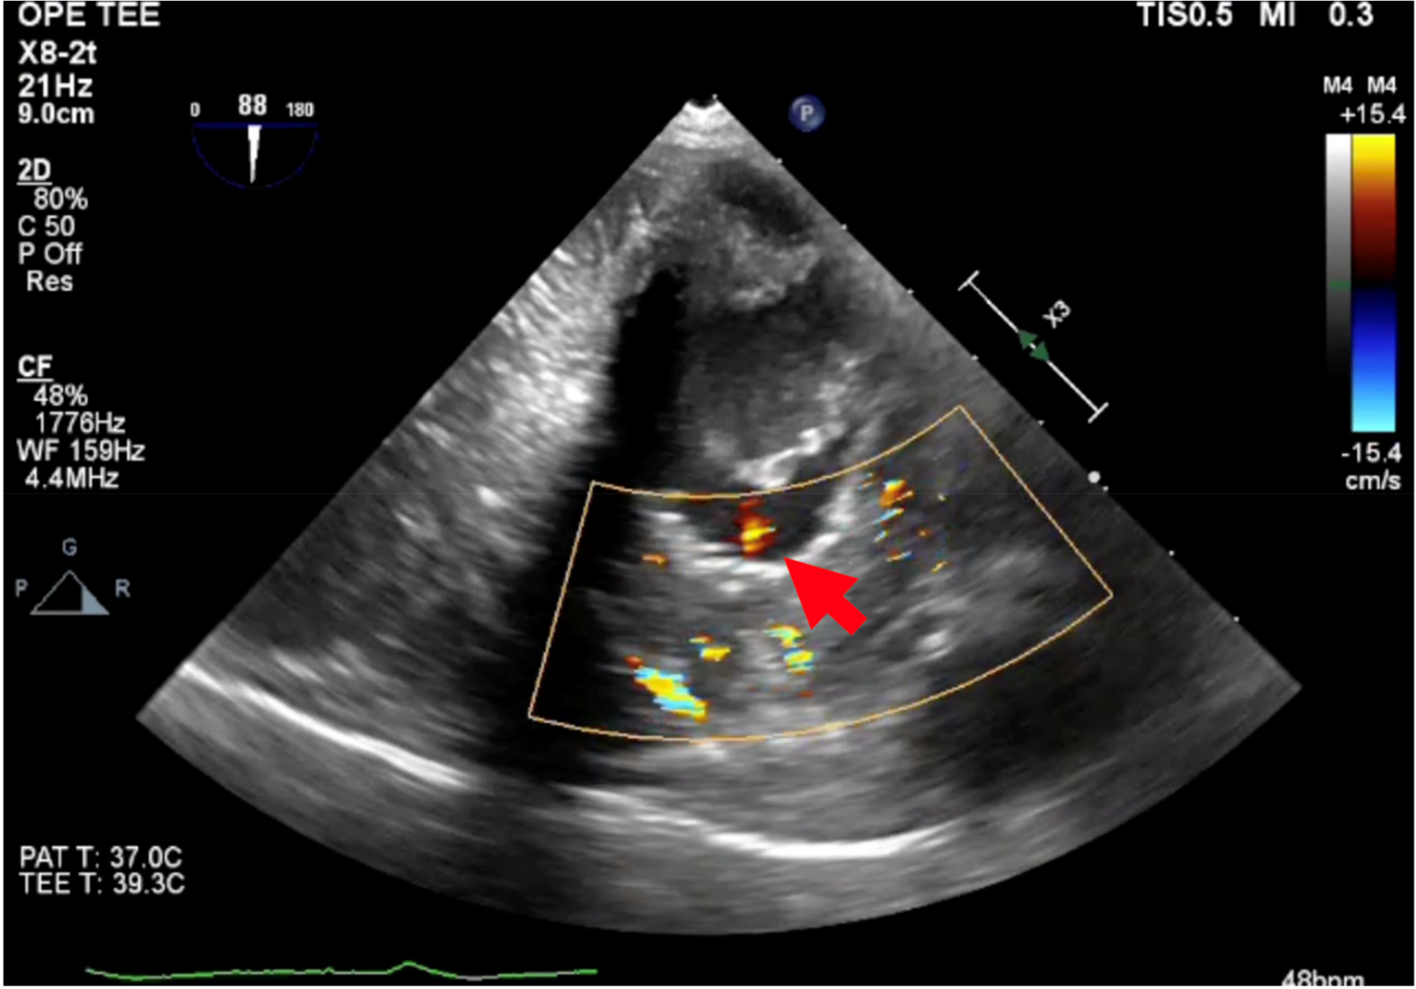 Iatrogenic coronary artery fistula that developed during septal myectomy was detected intraoperatively through transesophageal echocardiography